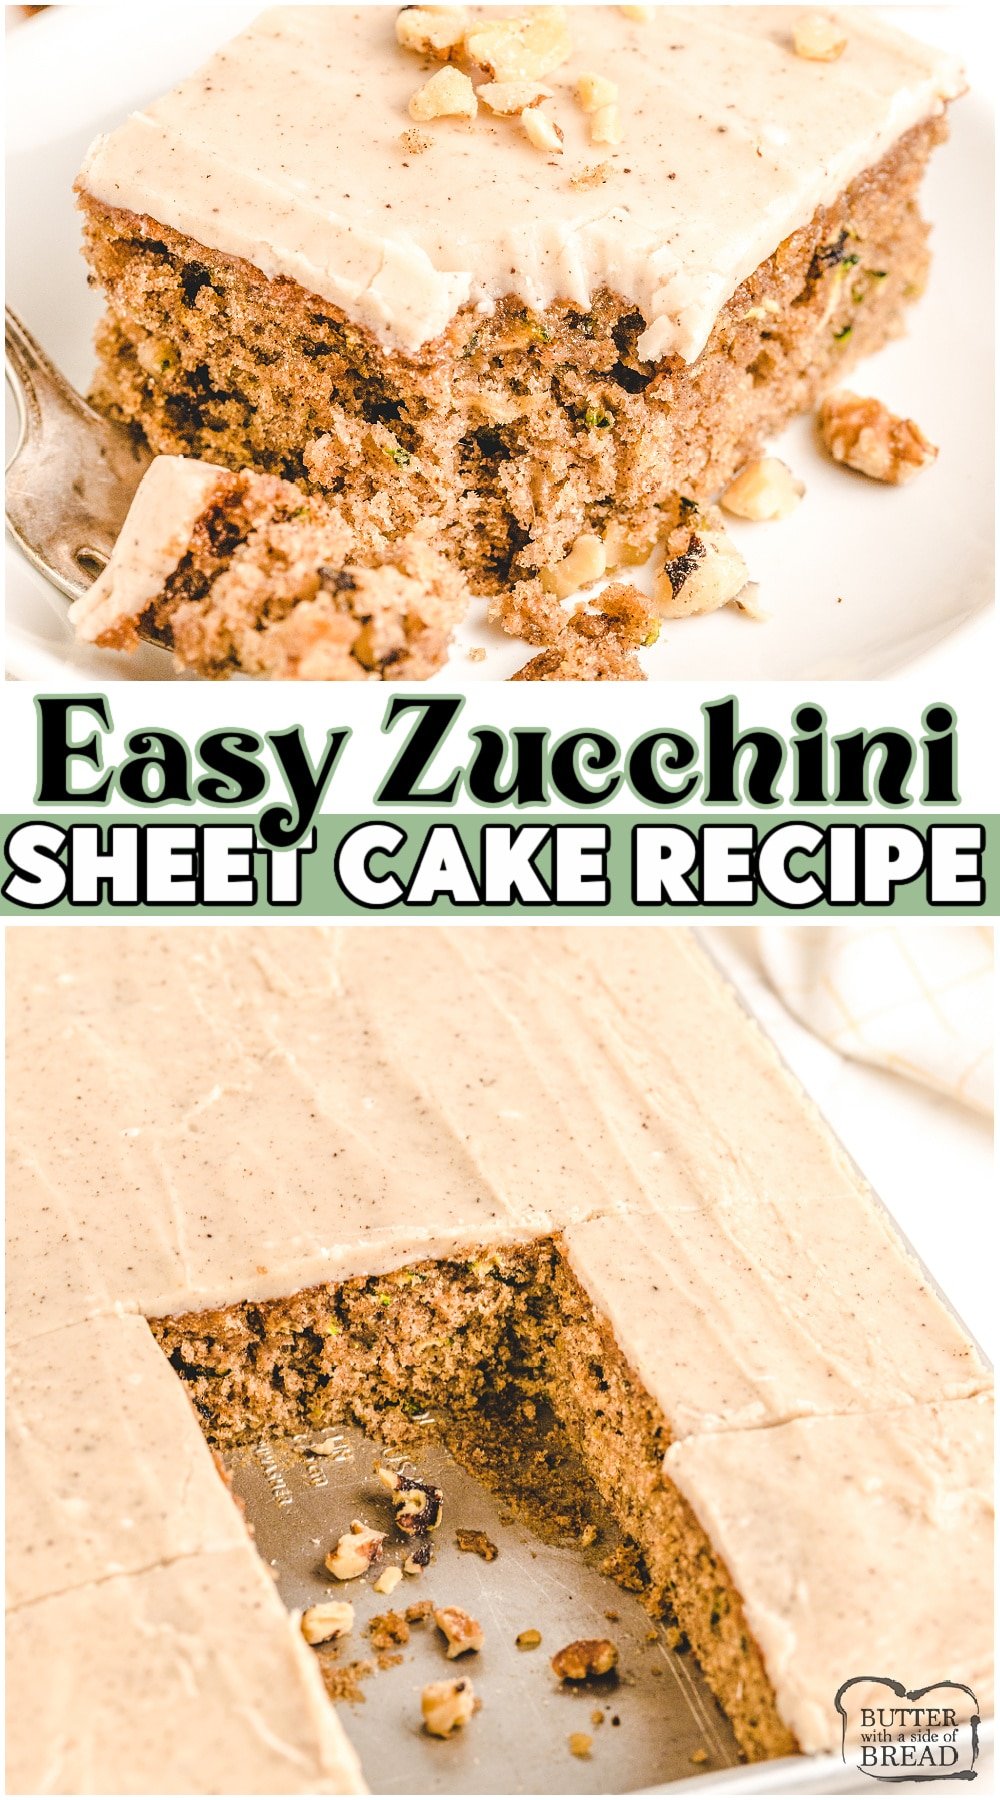 Zucchini Spice cake made with fresh grated zucchini, flour, sugar, eggs & a delightful blend of cinnamon spice! Moist, flavorful sheet cake topped with an incredible brown butter icing and chopped pecans or walnuts. #zucchini #cake #sheetcake #spice #baking #easyrecipe from BUTTER WITH A SIDE OF BREAD